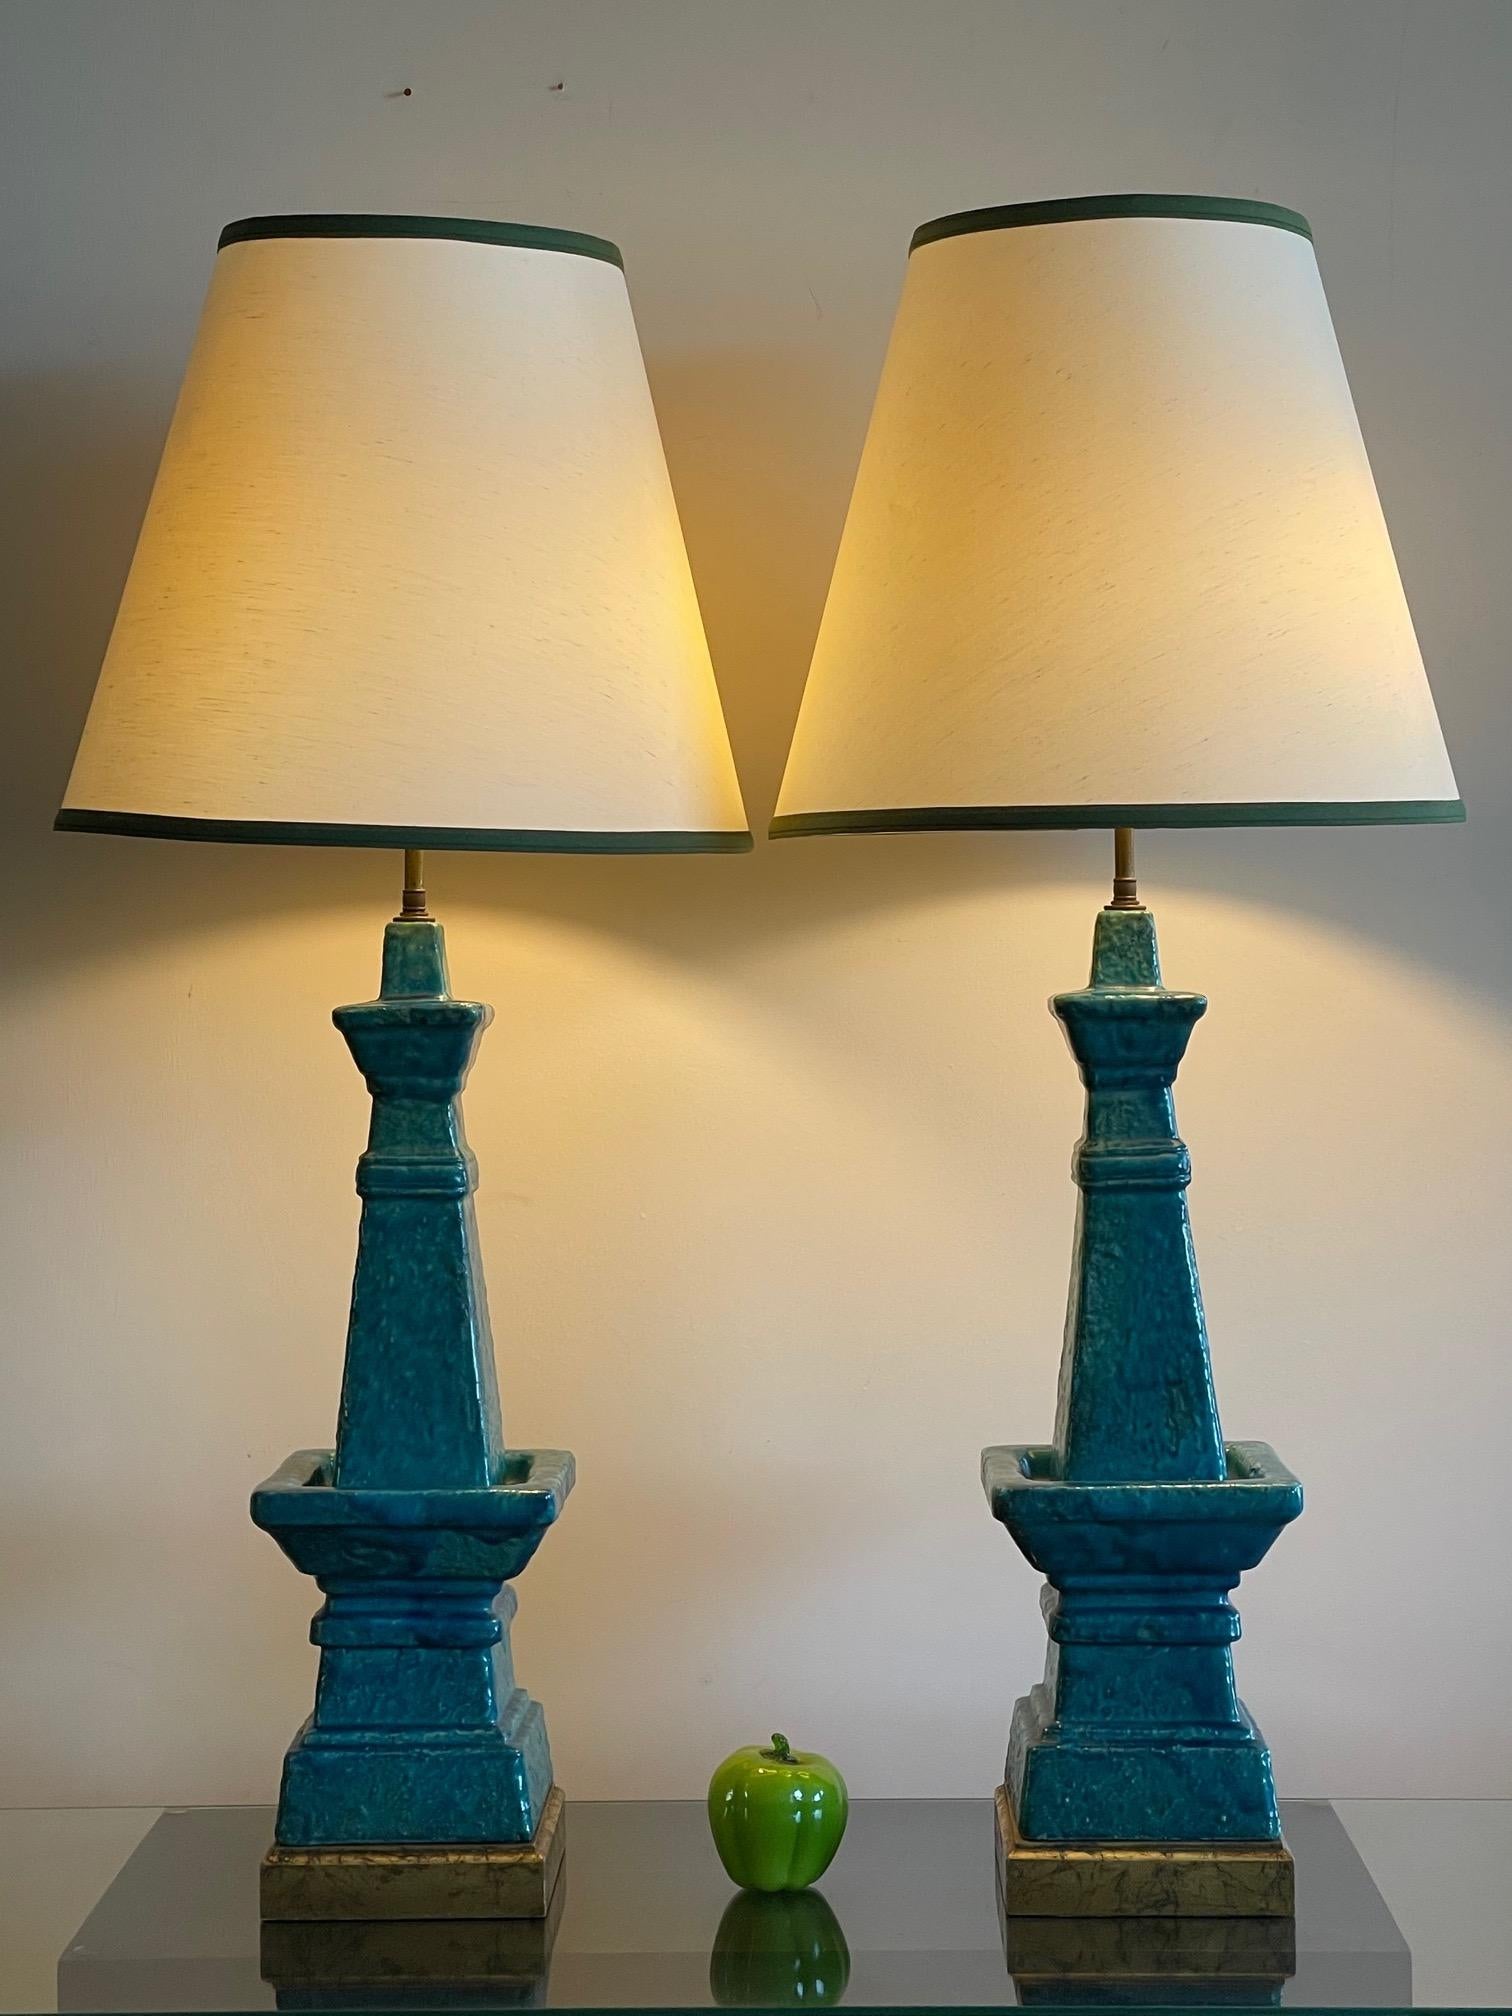 A pair of impressive Bittosi lamps in turquoise crackle and lava ceramic. Very stately and architectural these lamps measure 39.5